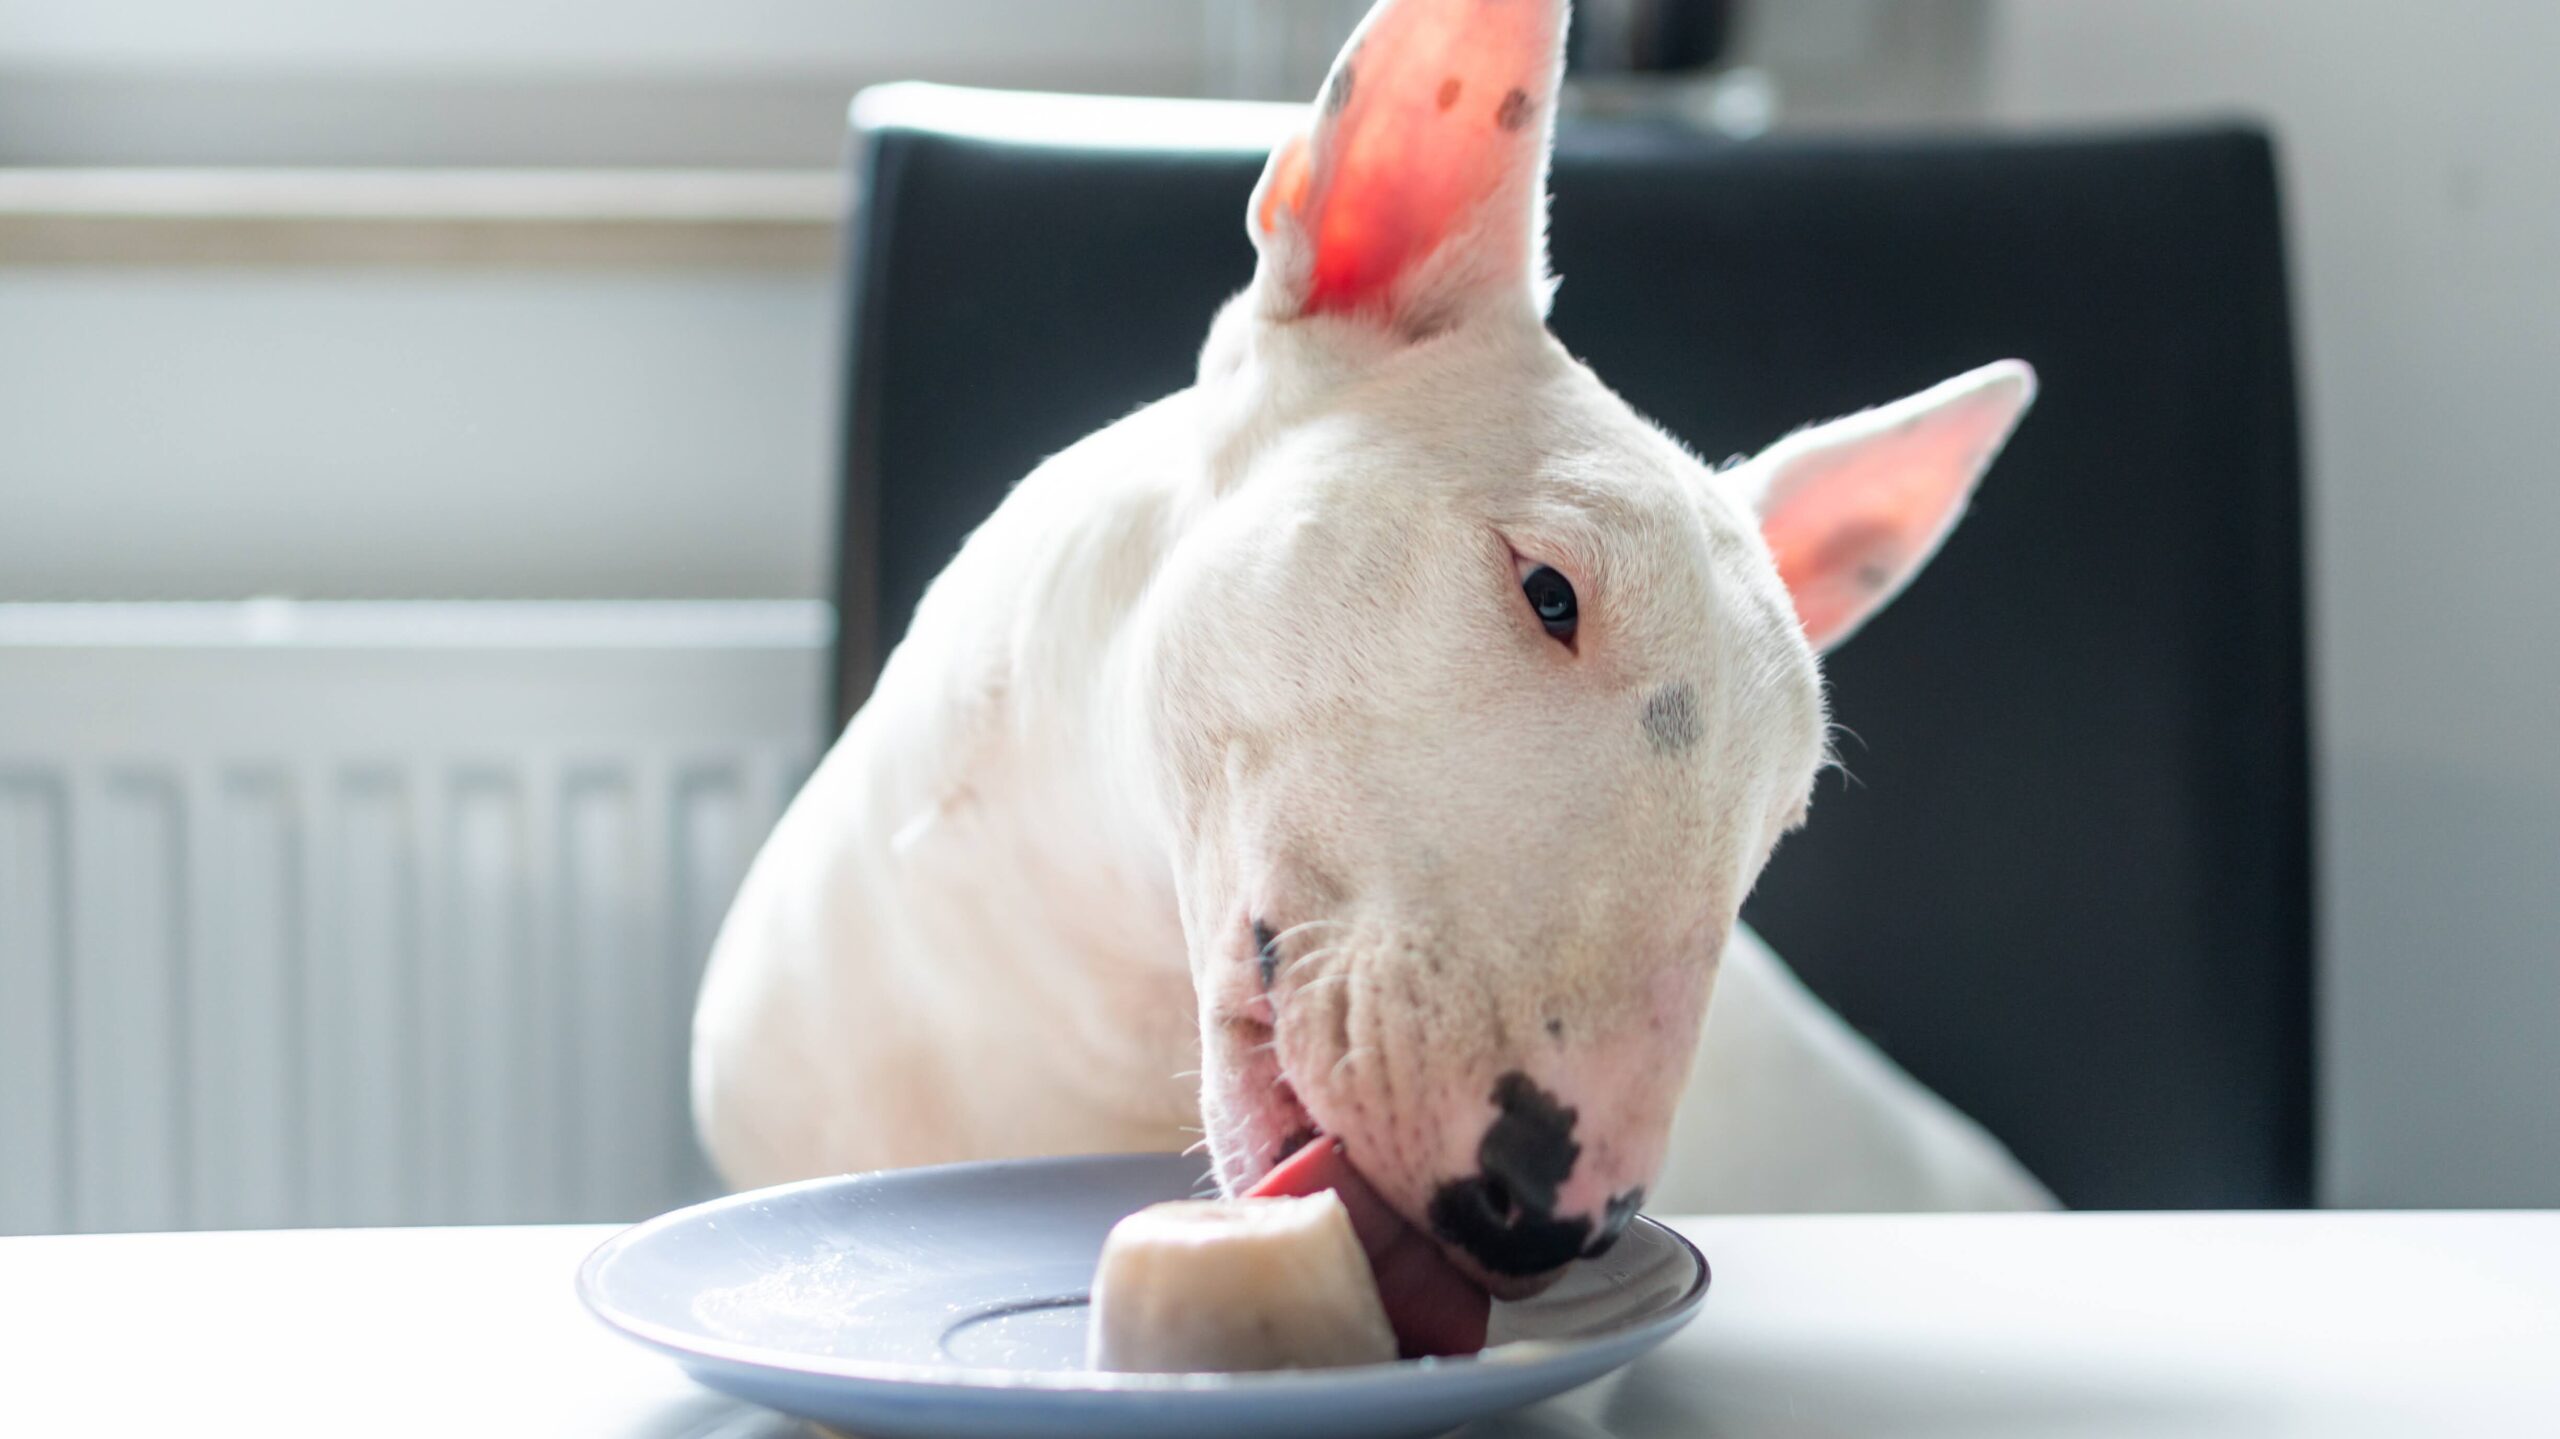 Bull terrier dog sitting on the chair and licking ice cream on kitchen table